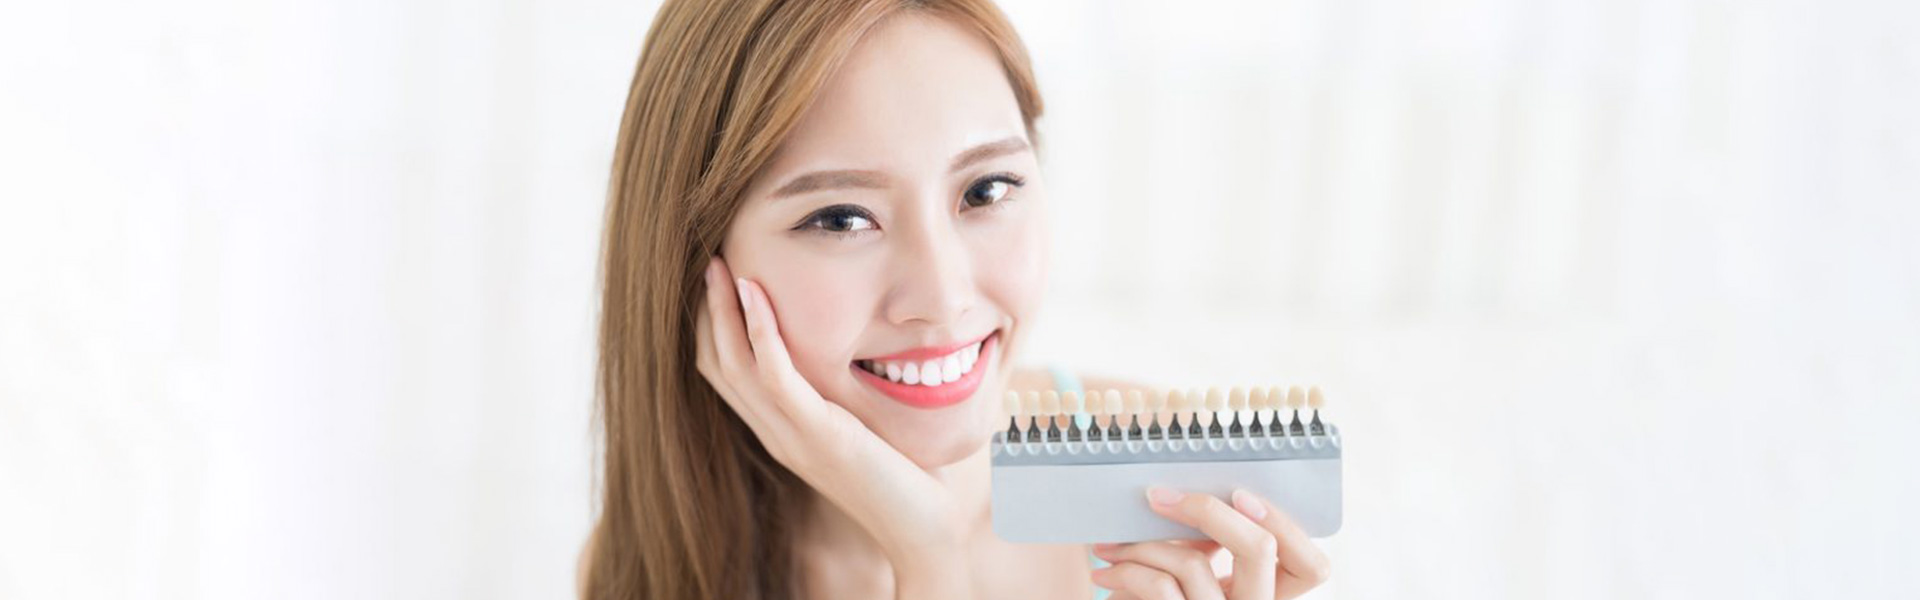 Dental Crowns: The Best Way to Extend the Lifespan of a Damaged Tooth